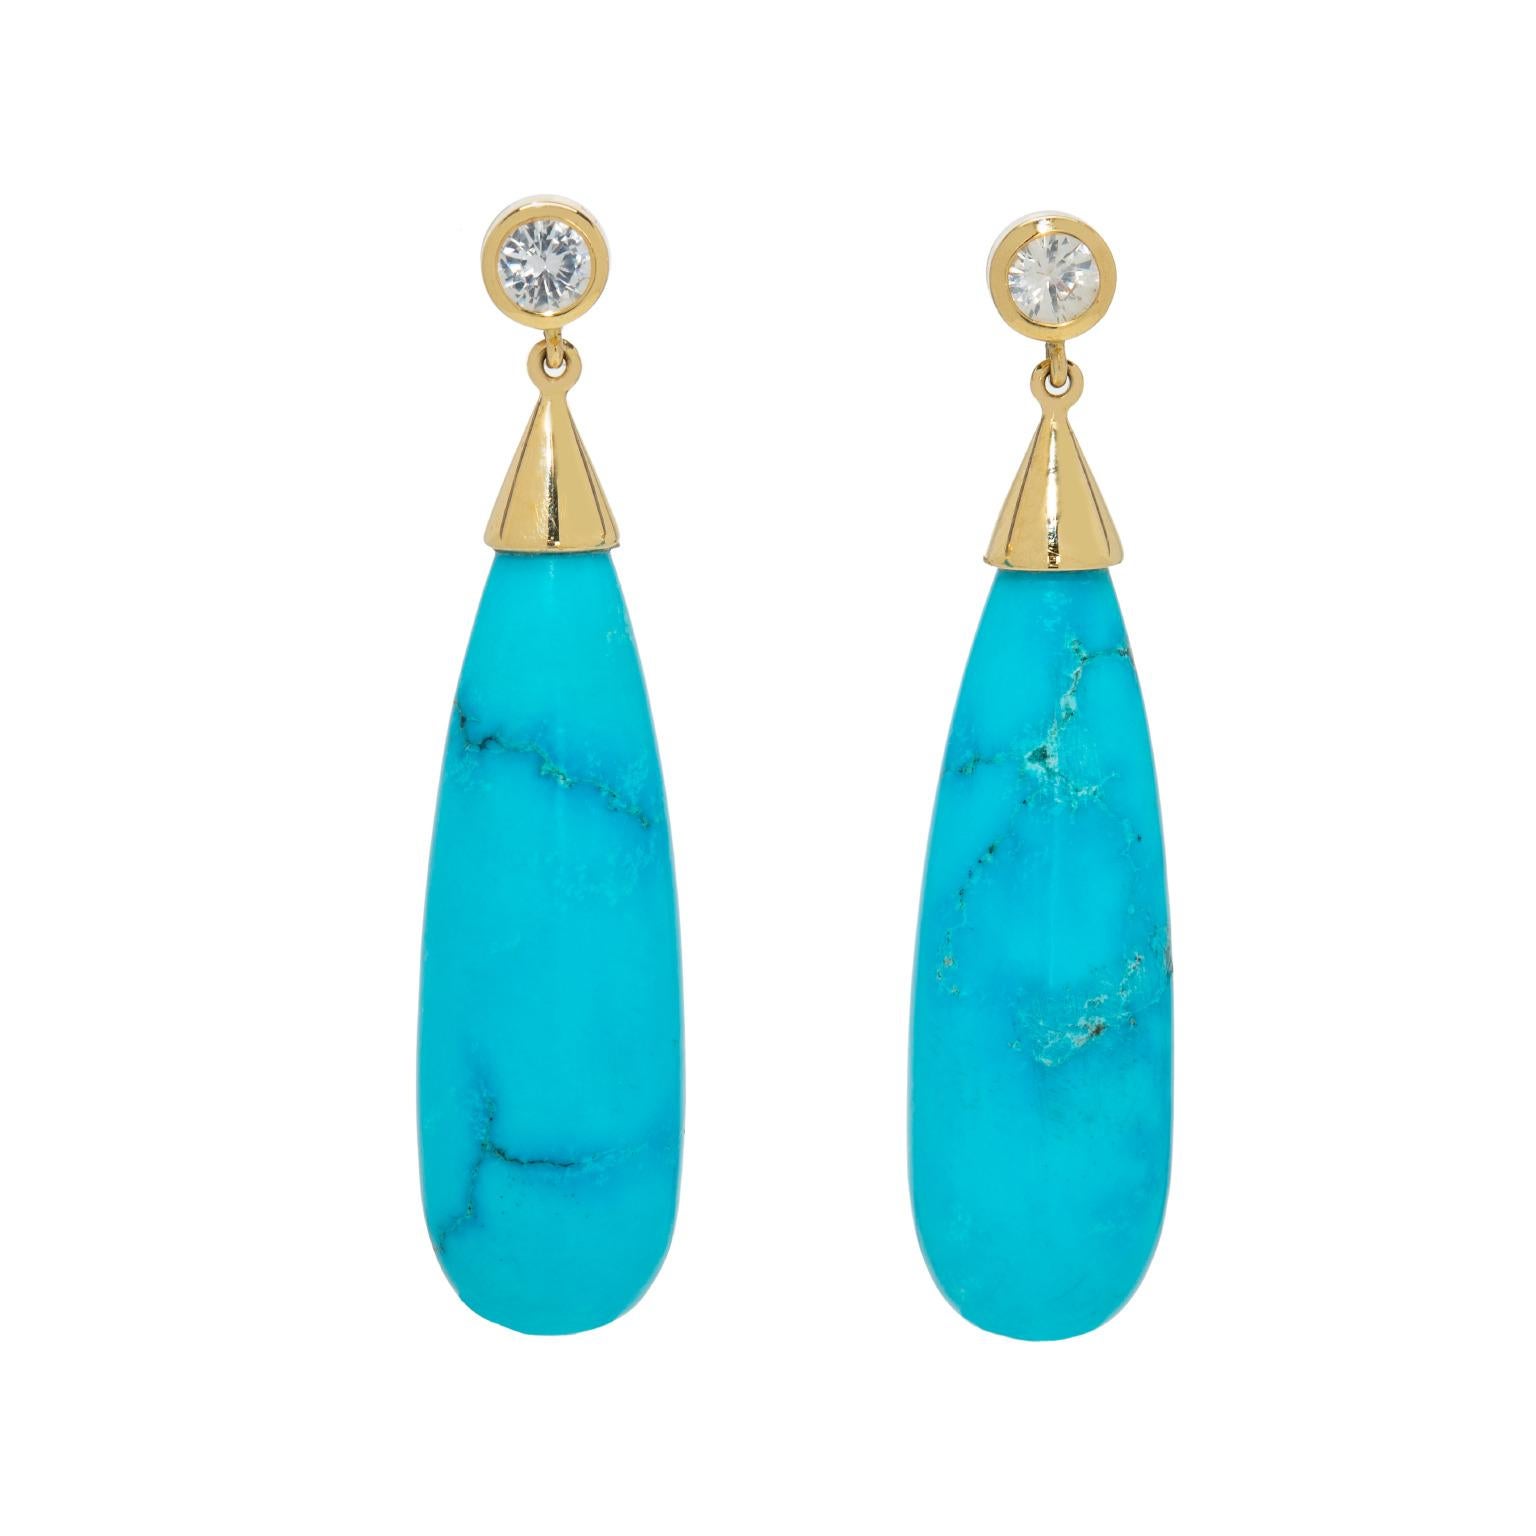 Round Cut 18 Karat Gold Earrings with Turquoise Drops and White Sapphires, by Gloria Bass For Sale